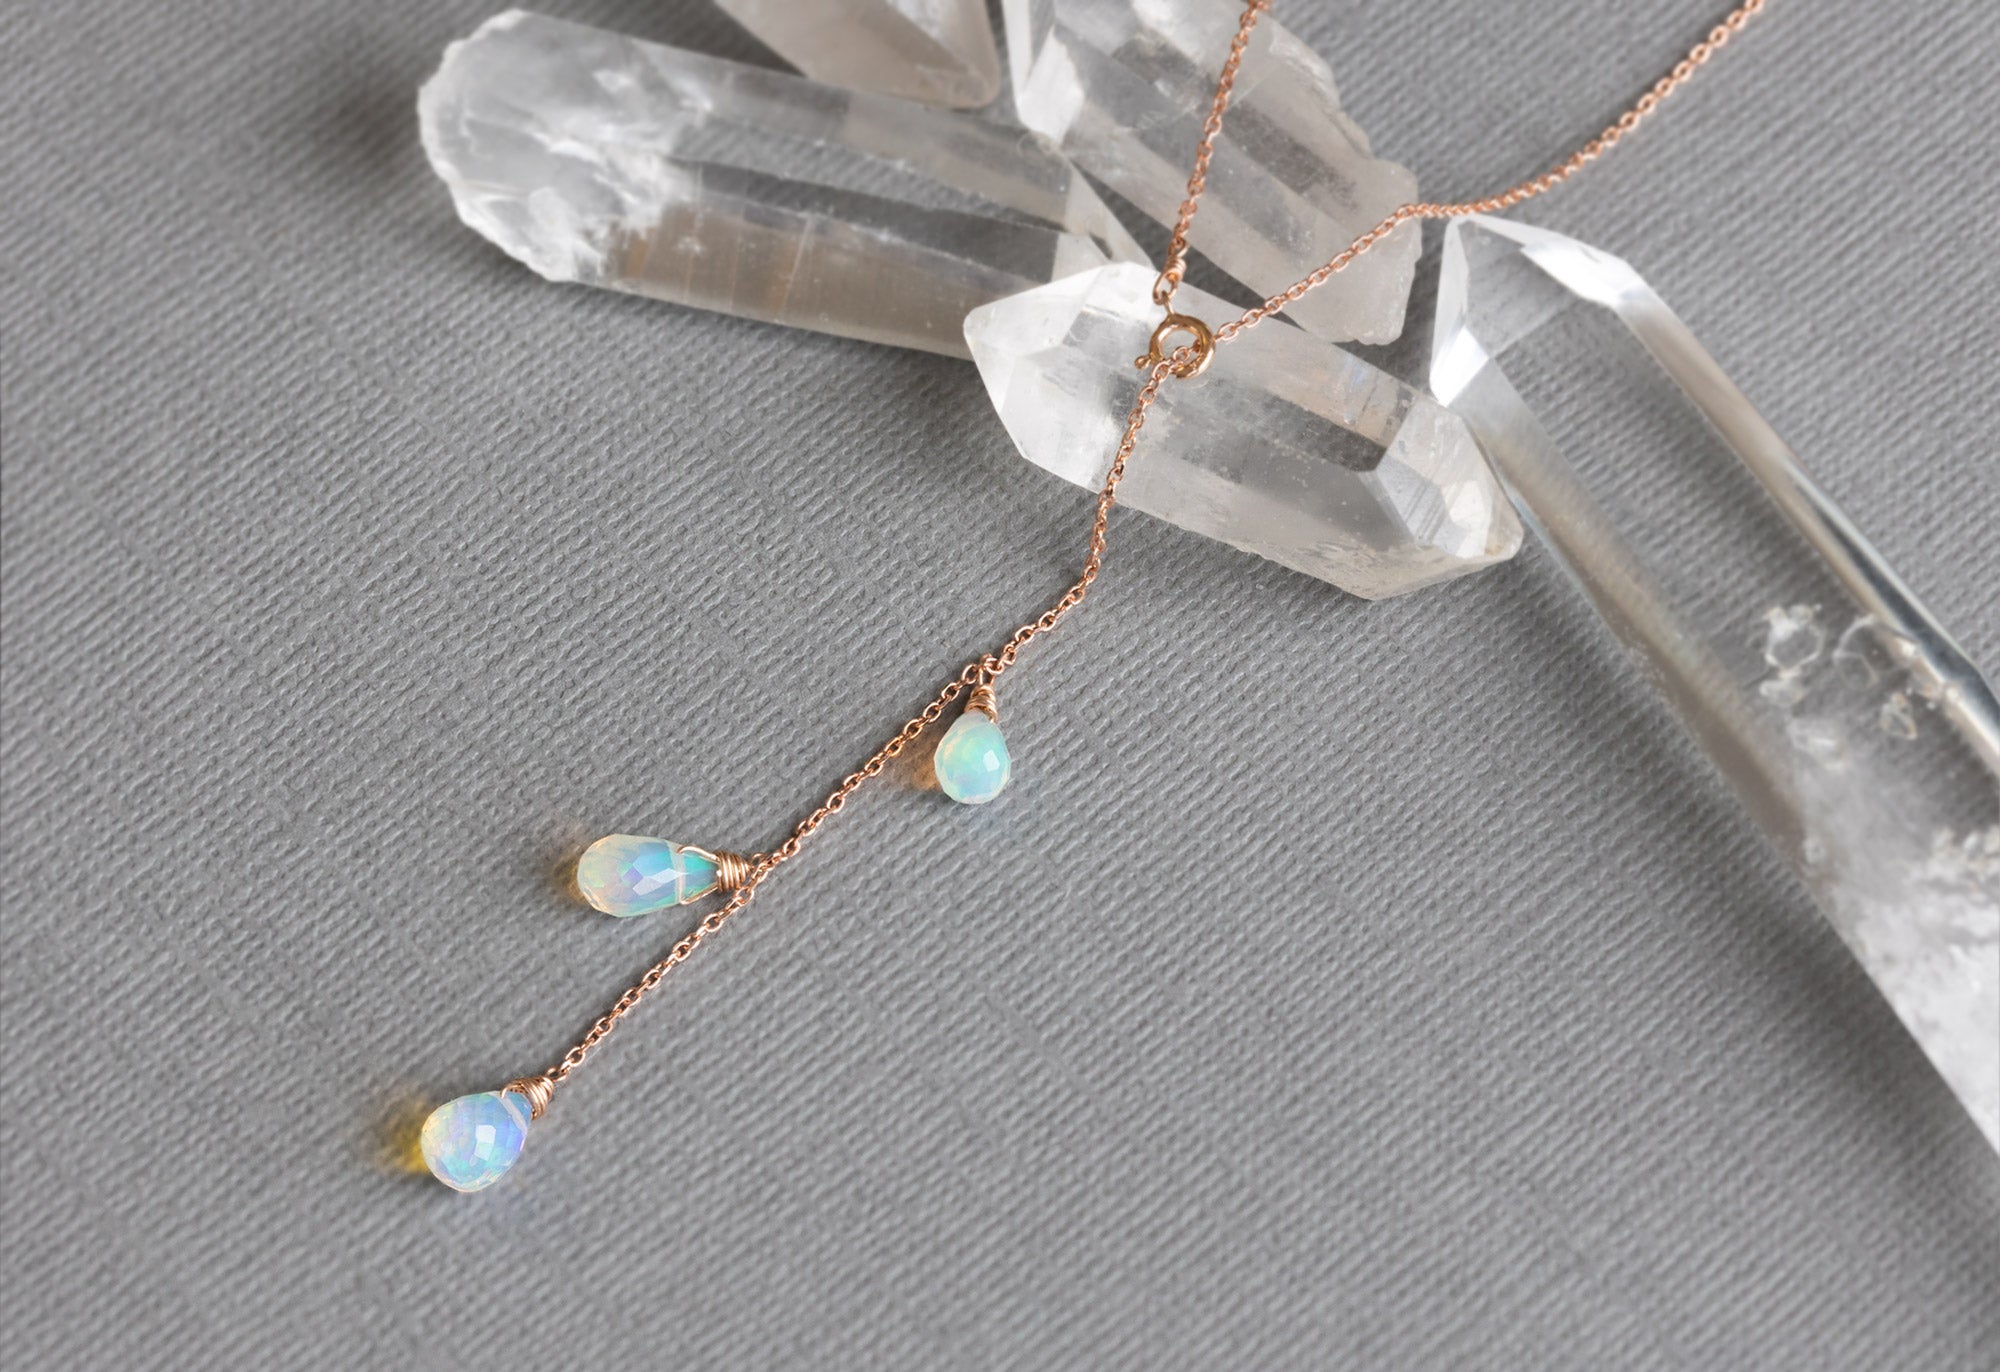 Buy 14K Gold Opal Stone Necklace, Minimal Layering Pendant, Synthetic Opal  Necklace, Personalized, Minimal Everyday Jewelry, Birthstone Necklace  Online in India - Etsy